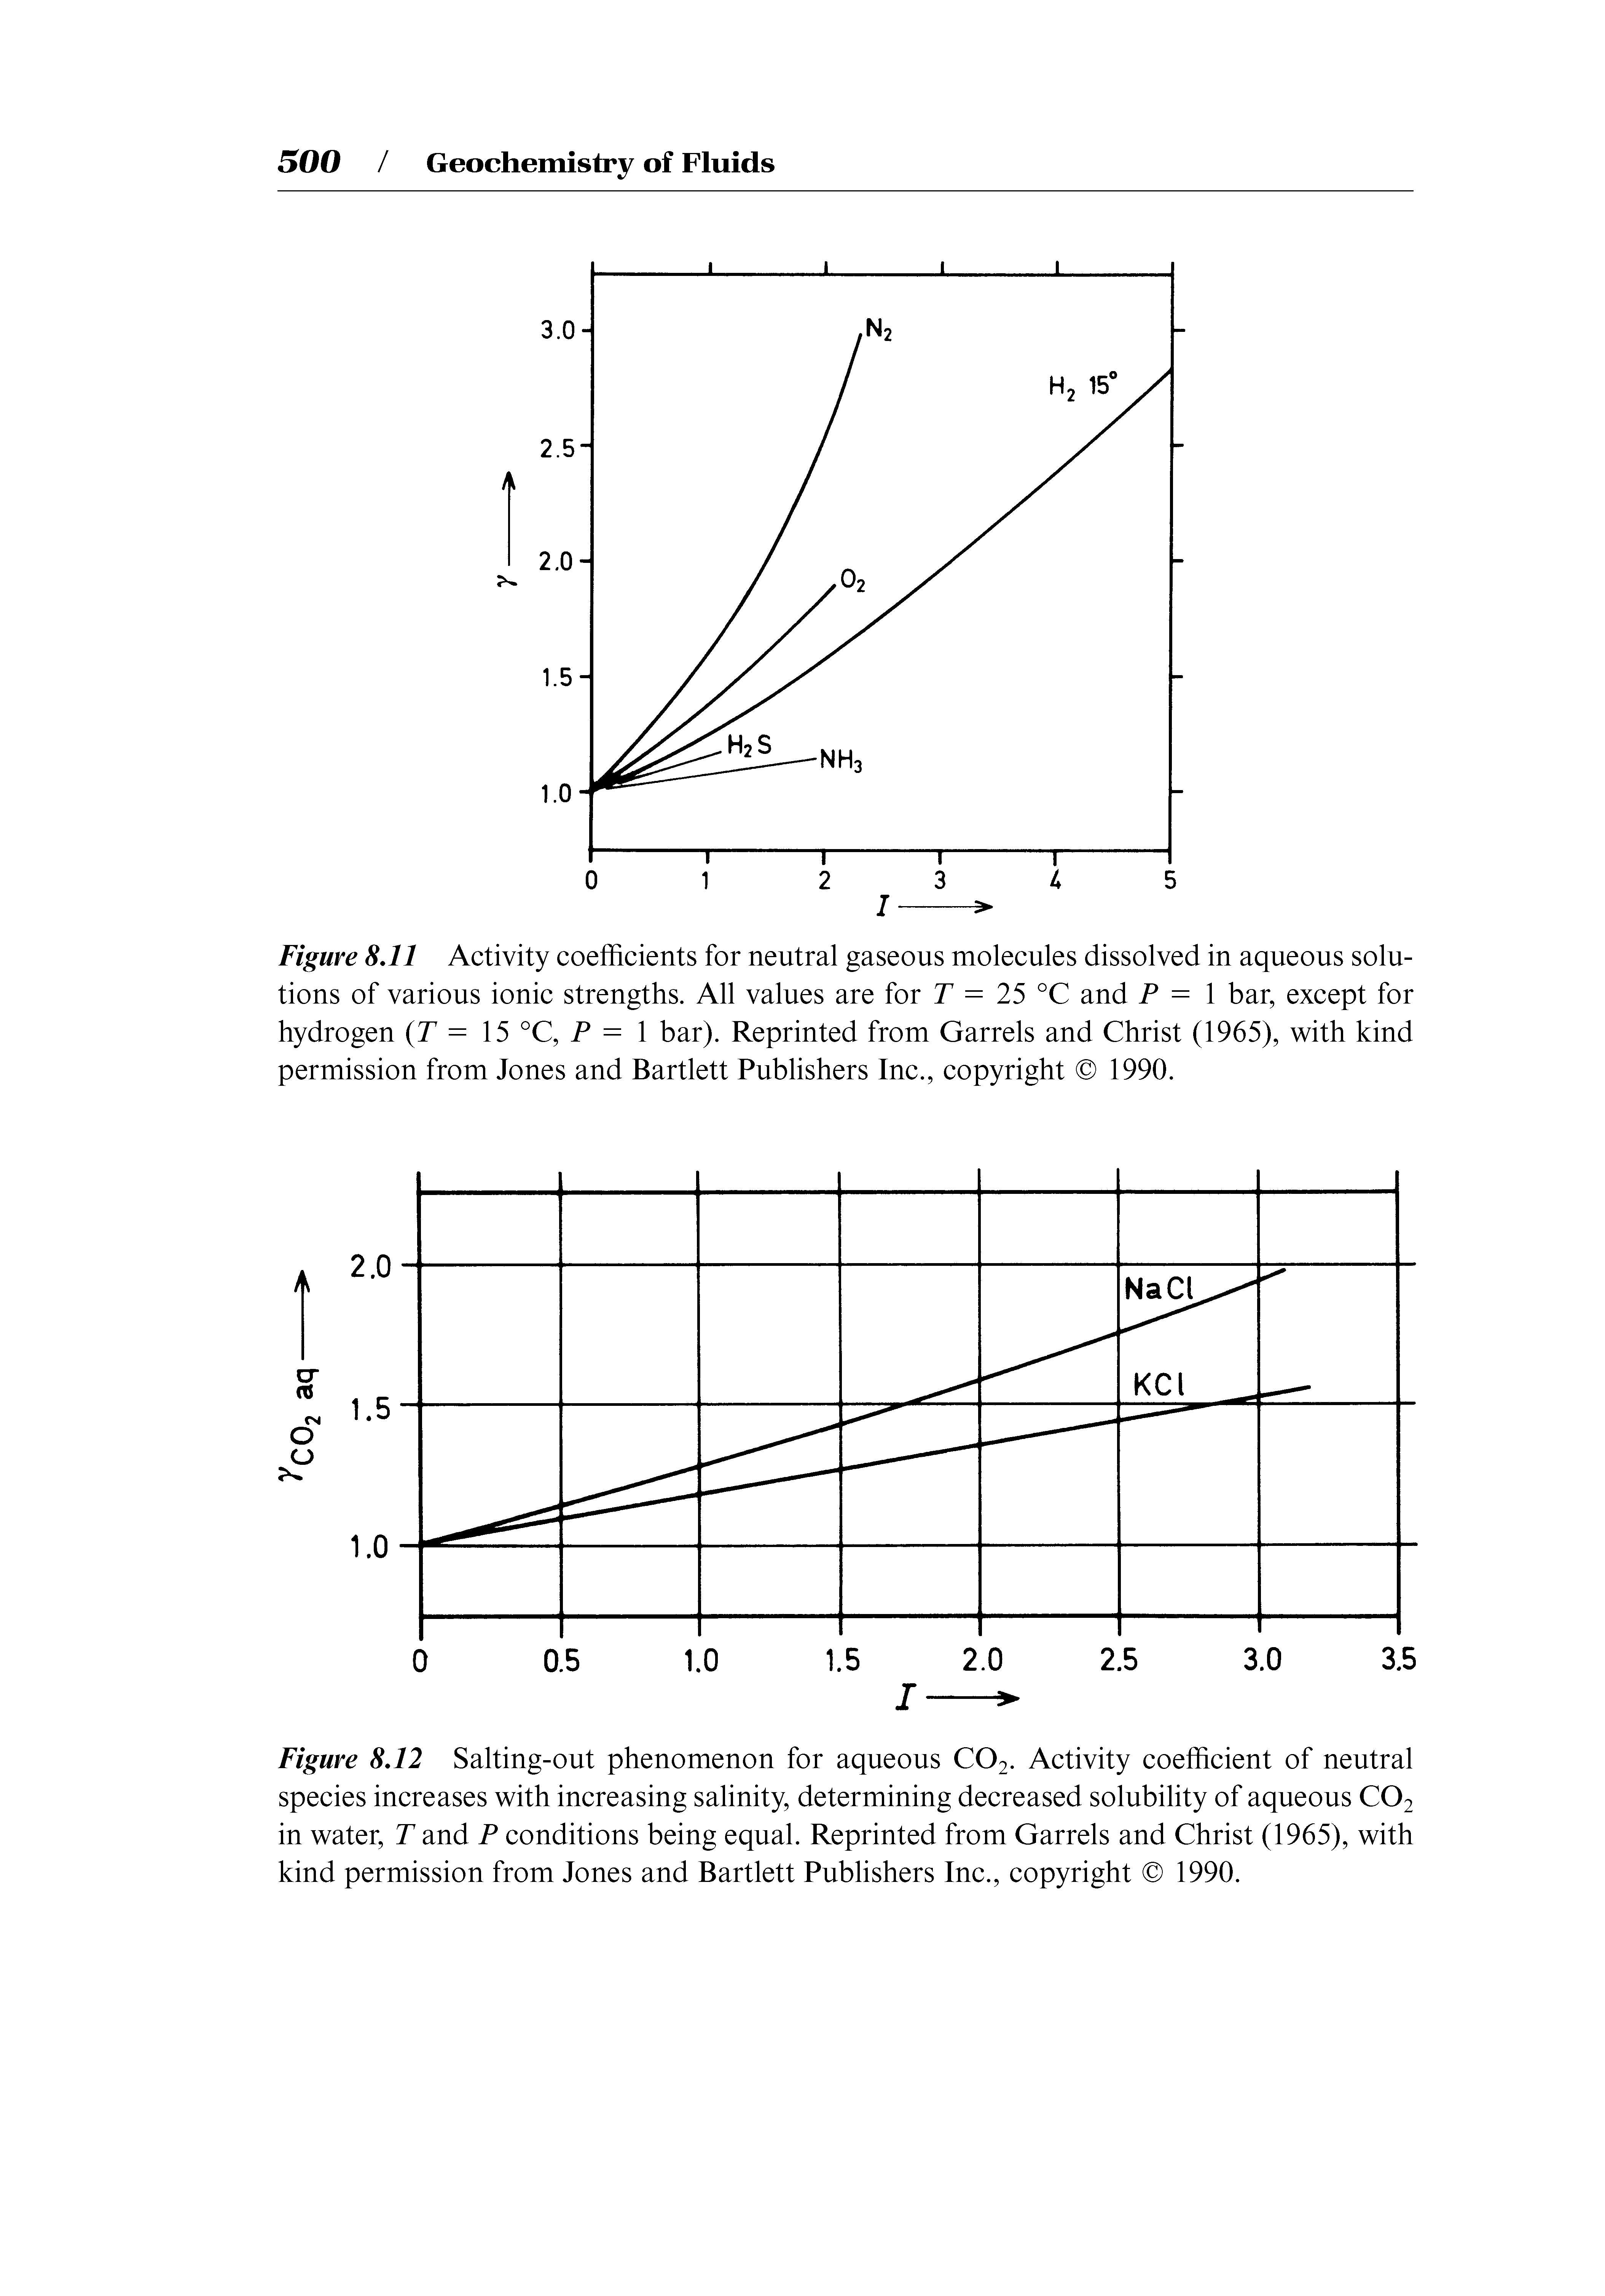 Figure 8,11 Activity coefficients for neutral gaseous molecules dissolved in aqueous solutions of various ionic strengths. All values are for T = 25 °C and P = 1 bar, except for hydrogen (T = 15 P = I bar). Reprinted from Garrels and Christ (1965), with kind permission from Jones and Bartlett Publishers Inc., copyright 1990.